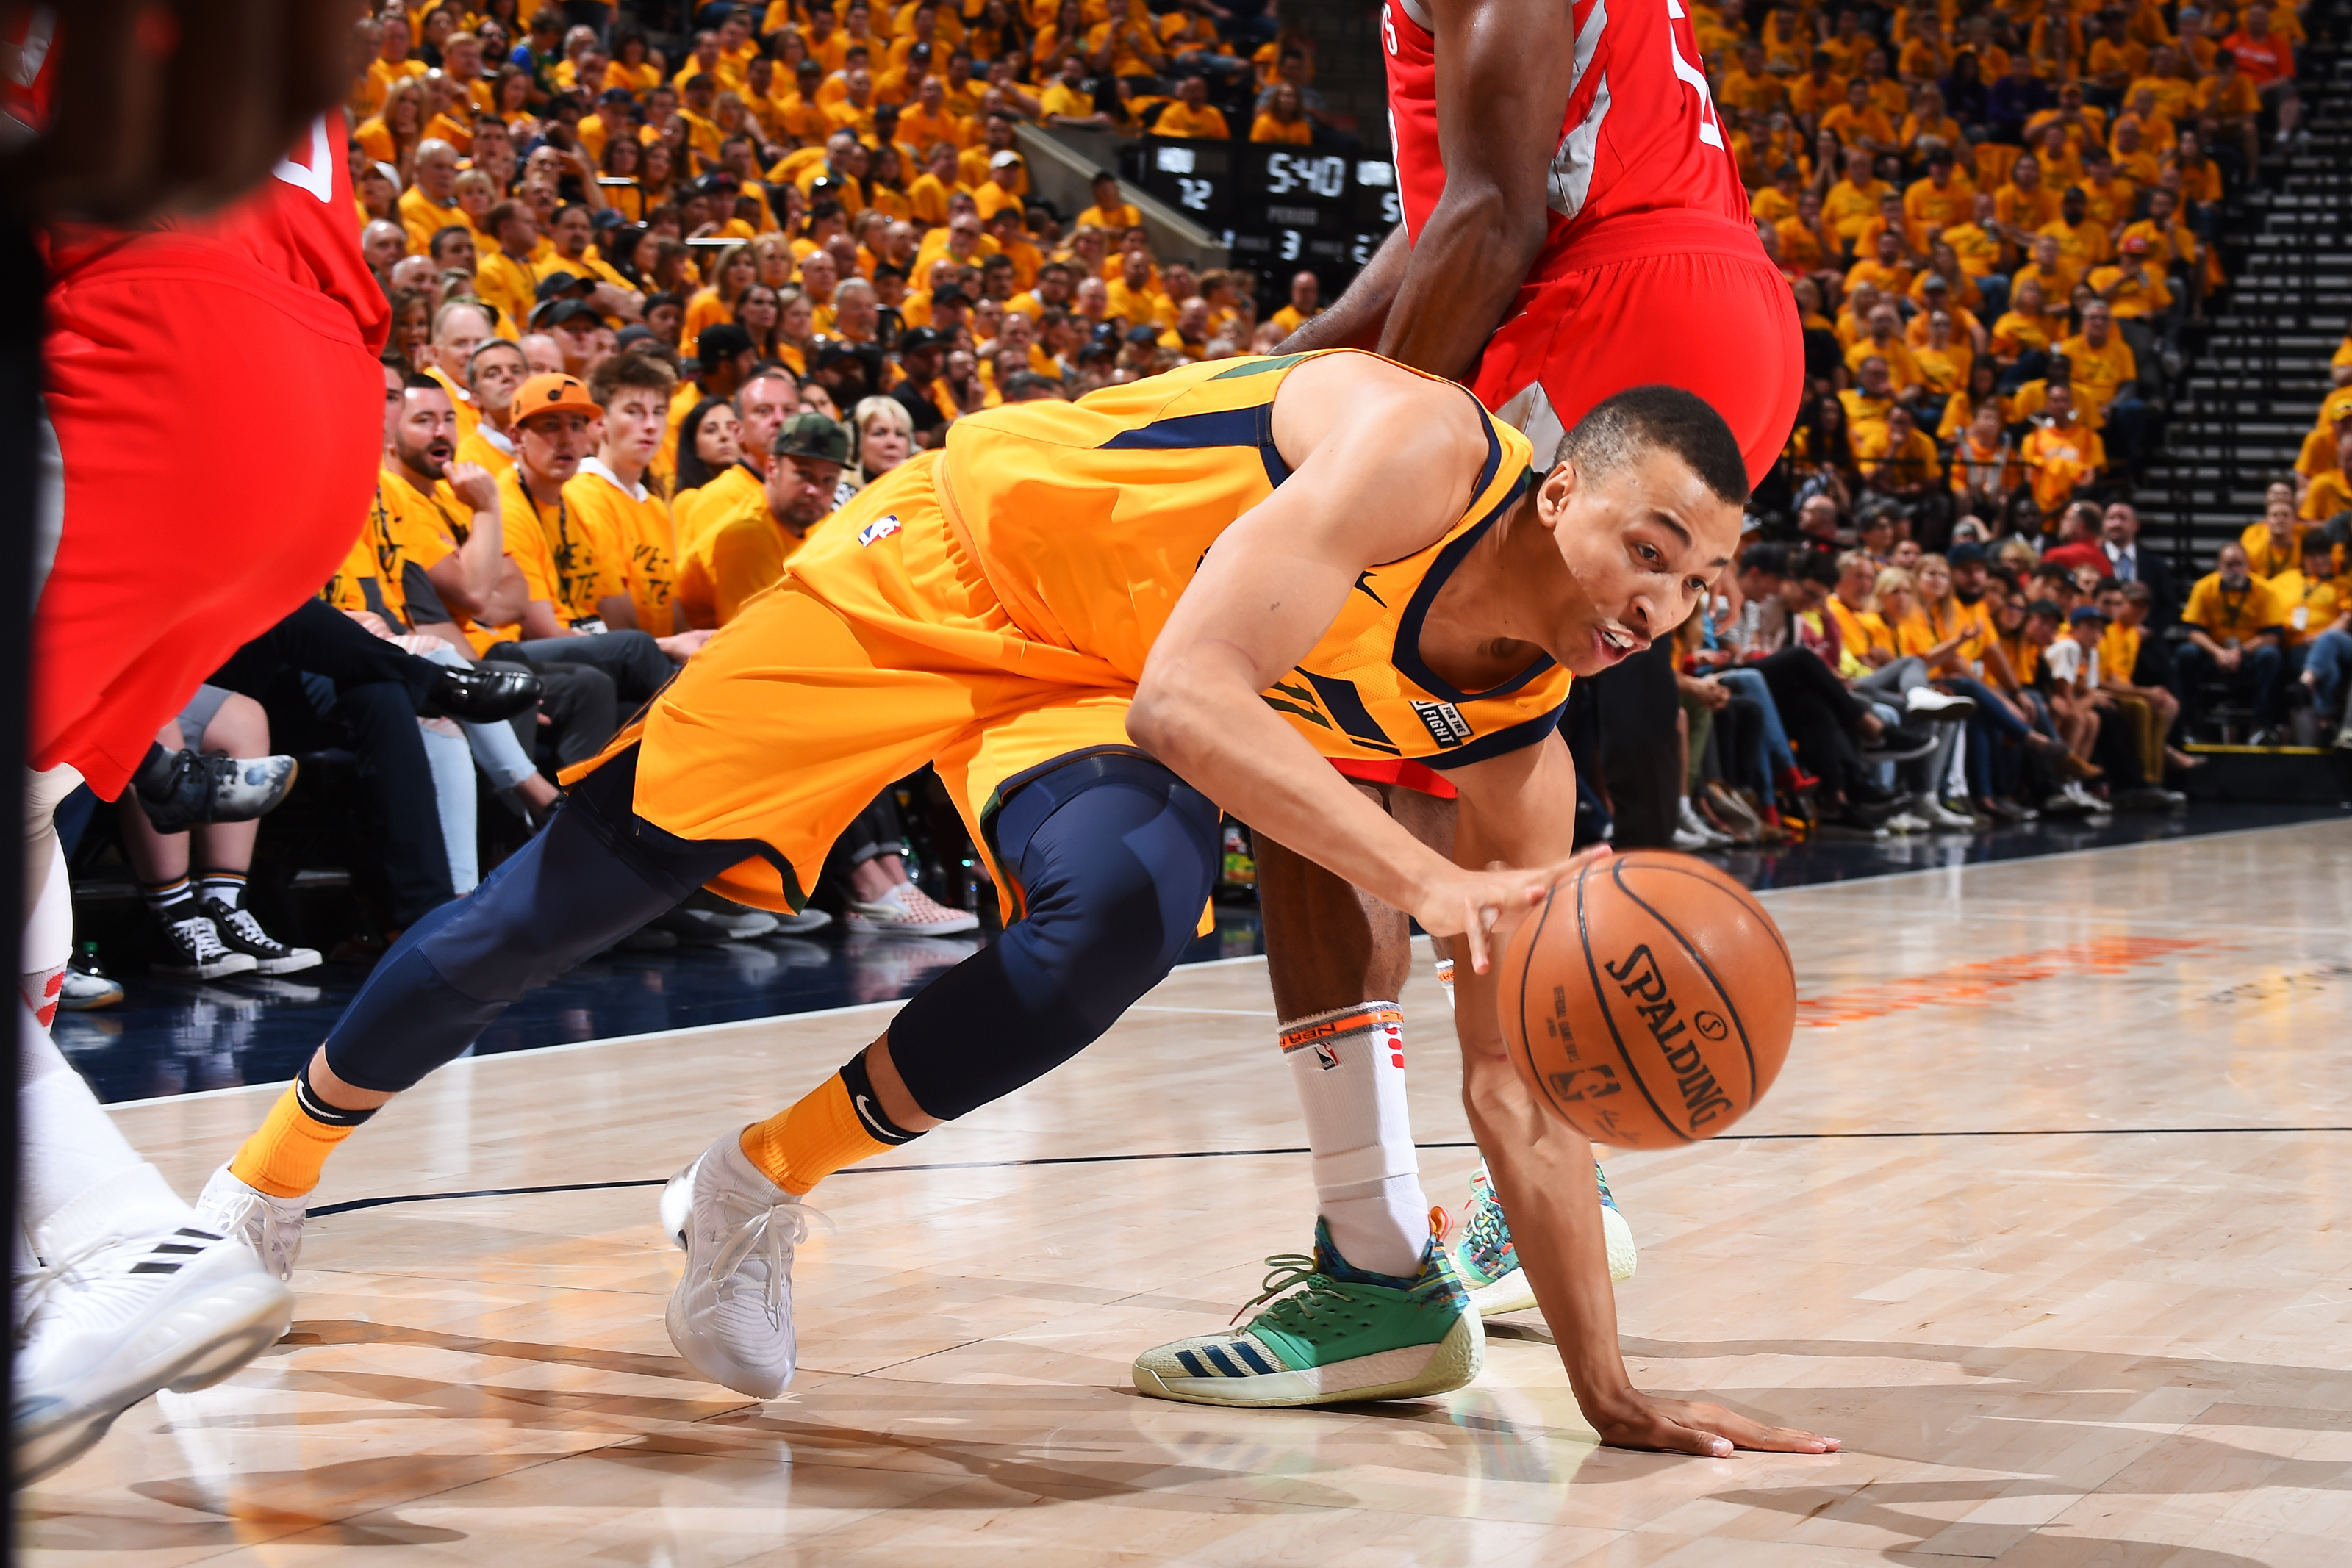 Dante Exum gets a chance to prove himself with Rockets